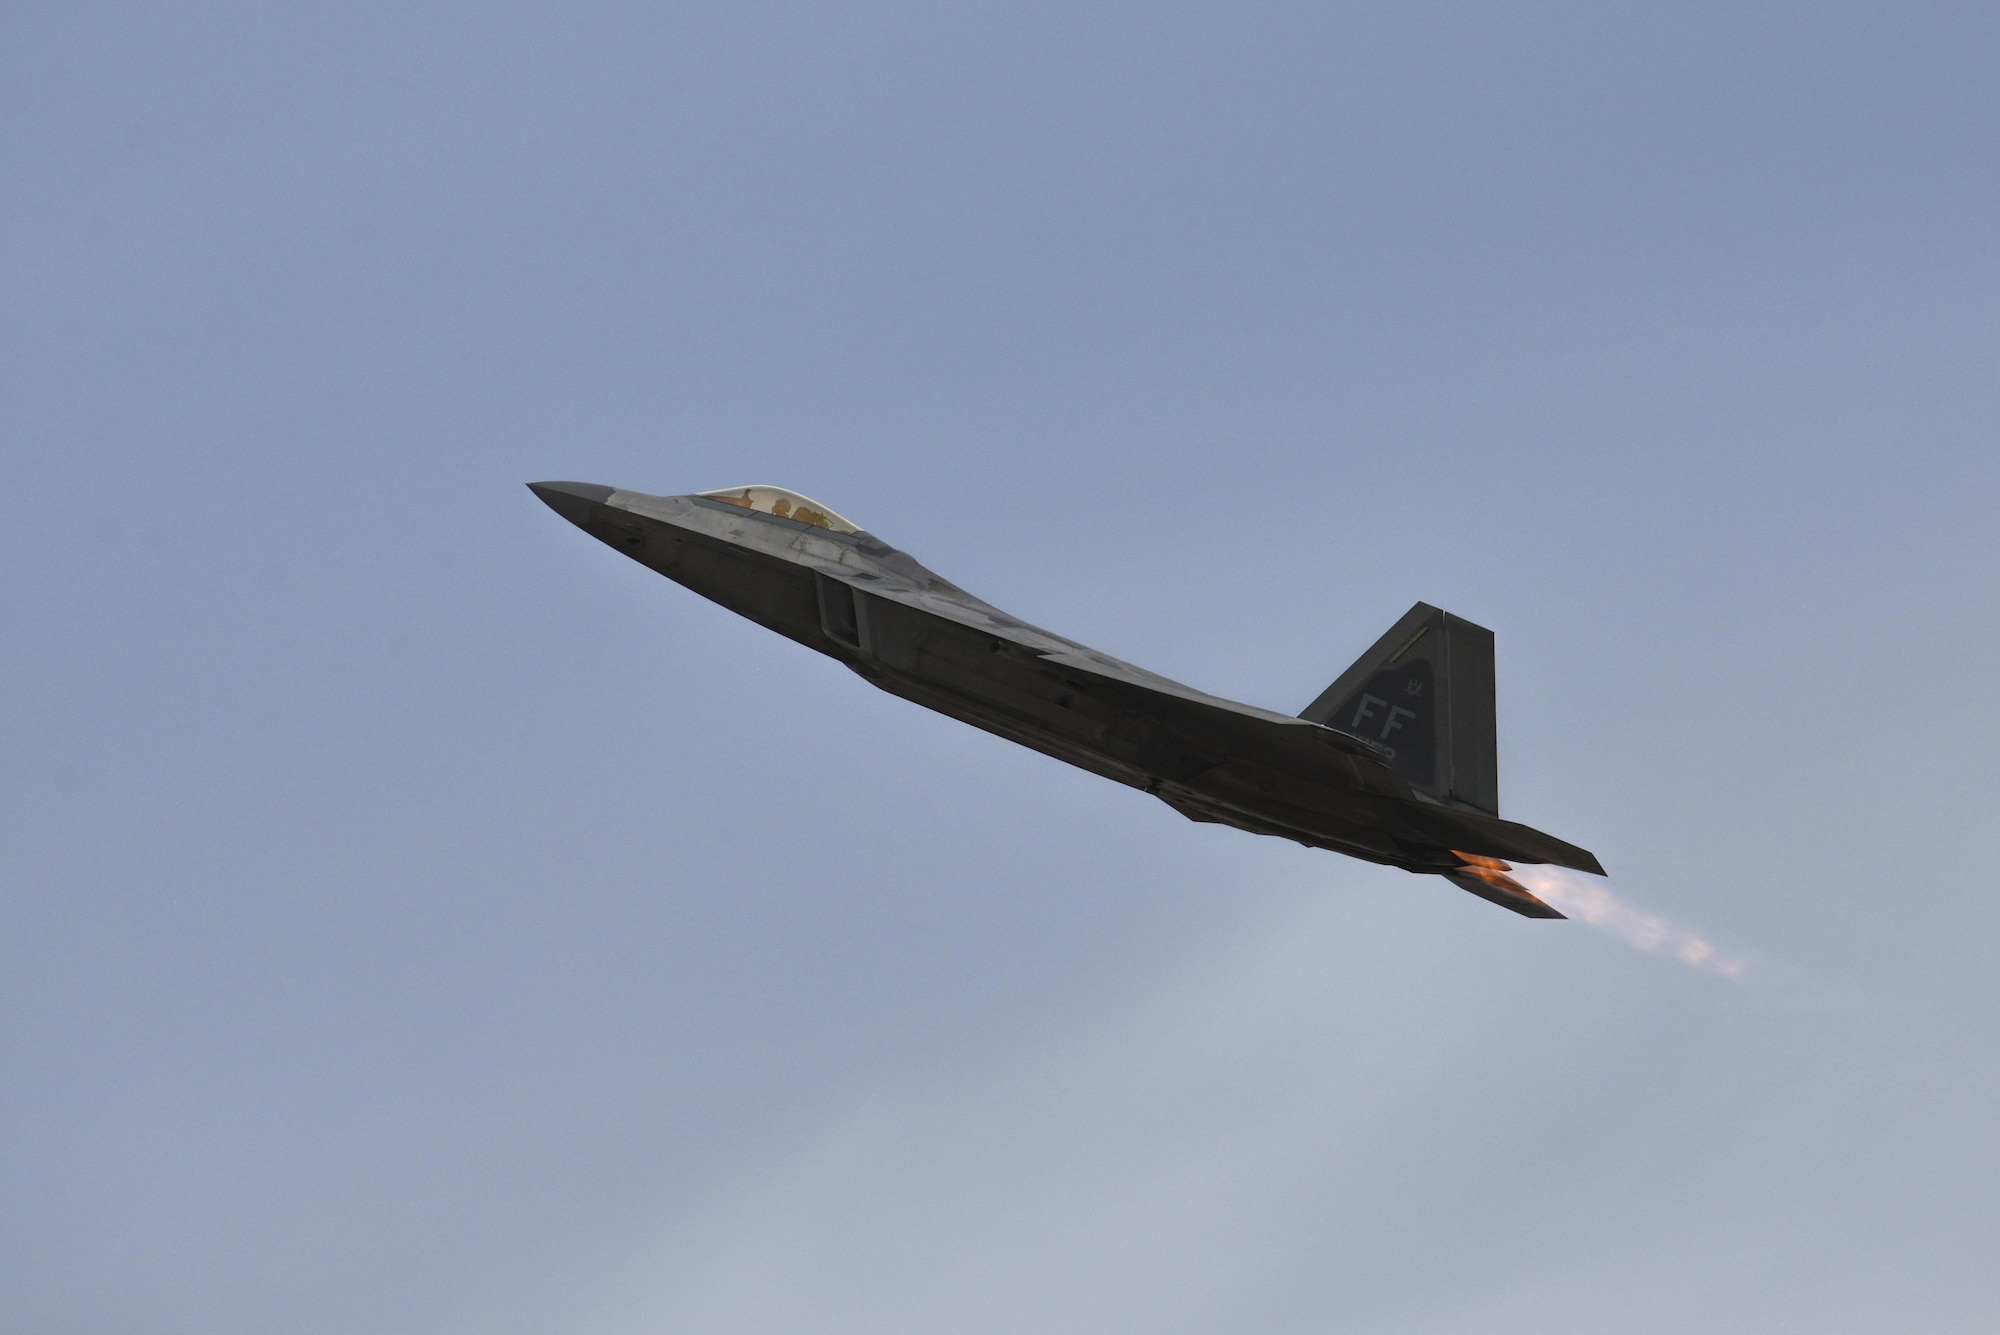 A U.S. Air Force F-22 Raptor performs an aerial manuever during the 2016 Heritage Flight Training and Certification Course at Davis-Mothan Air Force Base, Ariz., March 5, 2016. The Raptor’s combination of stealth, supercruise, maneuverability, and integrated avionics, coupled with improved supportability, represents an exponential leap in warfighting capabilities. (U.S. Air Force photo by Senior Airman Chris Massey/Released)